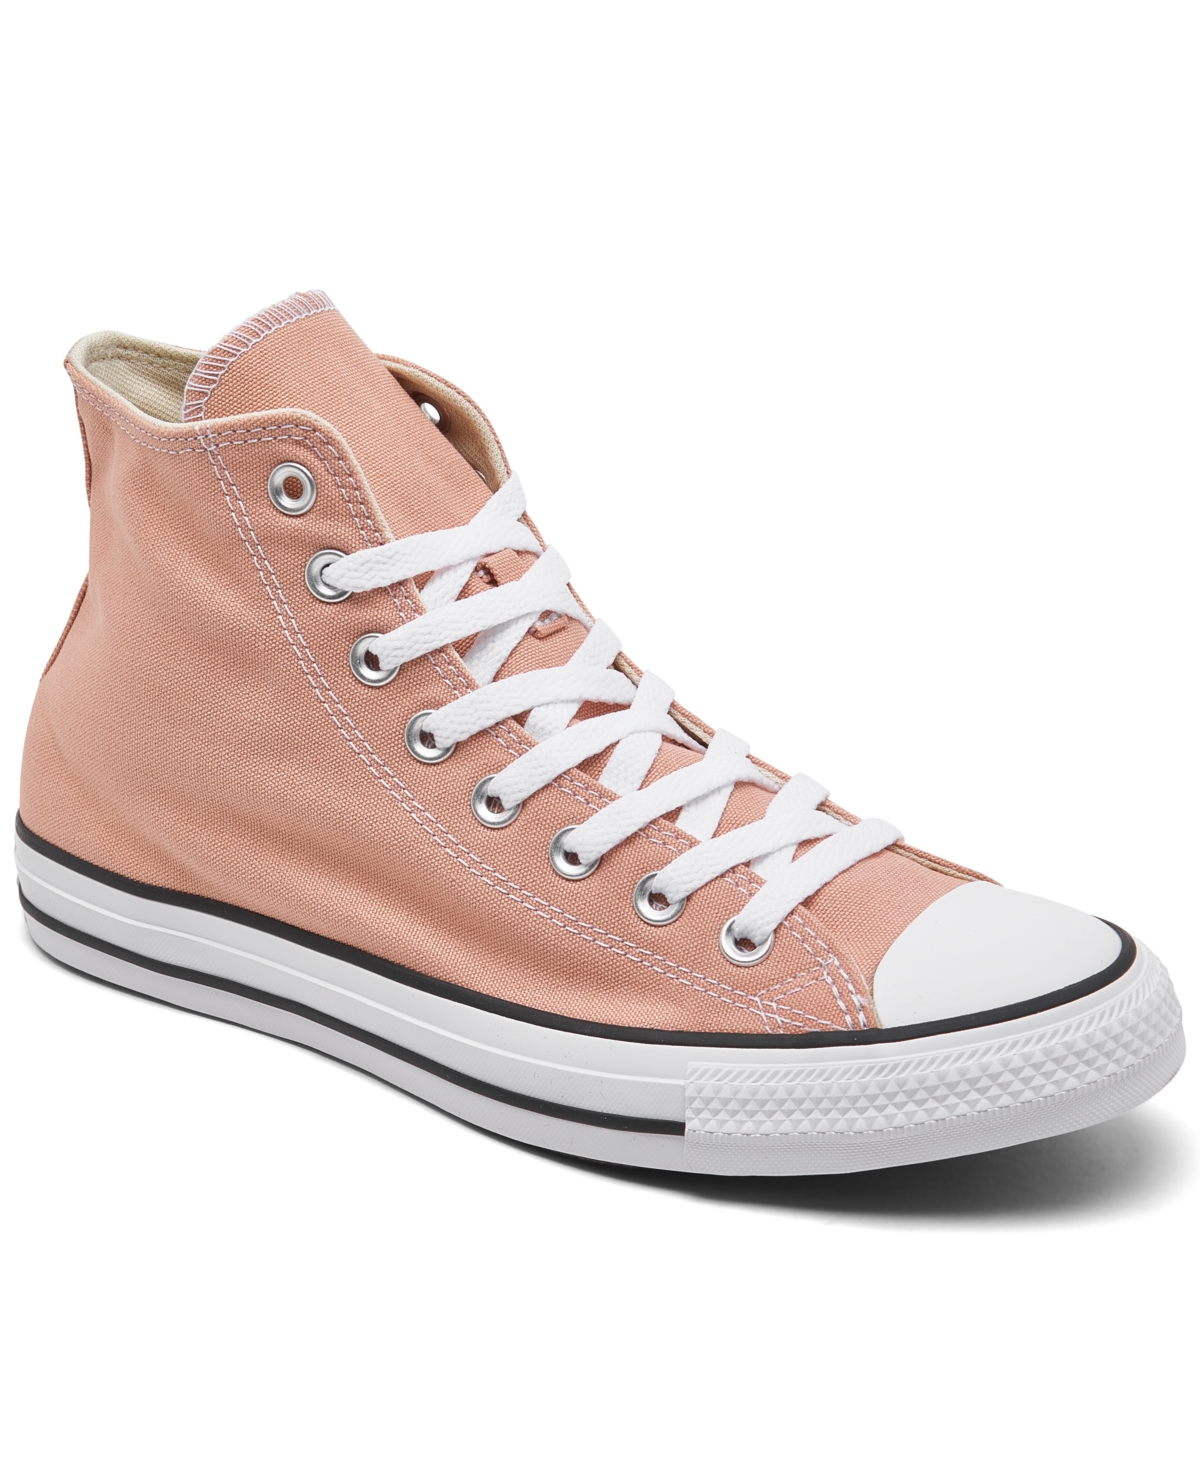 Women's Chuck Taylor High Top Casual Sneakers from Finish Line - Canyon Clay